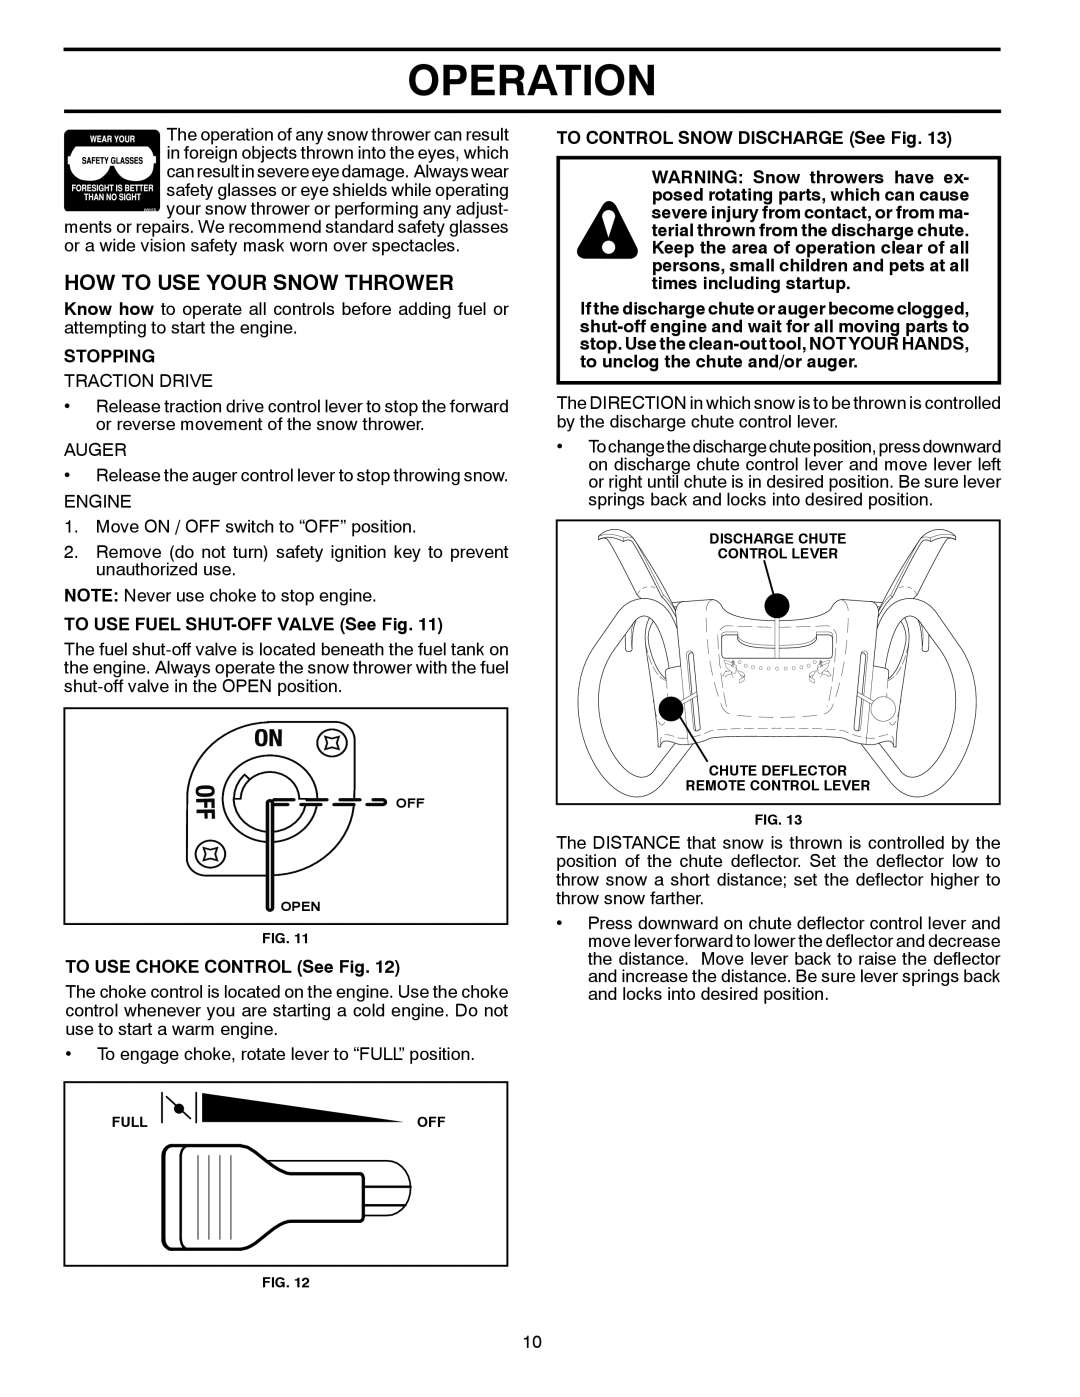 Poulan 435555, 96198003001 How To Use Your Snow Thrower, Operation, Stopping, TO USE FUEL SHUT-OFF VALVE See Fig 